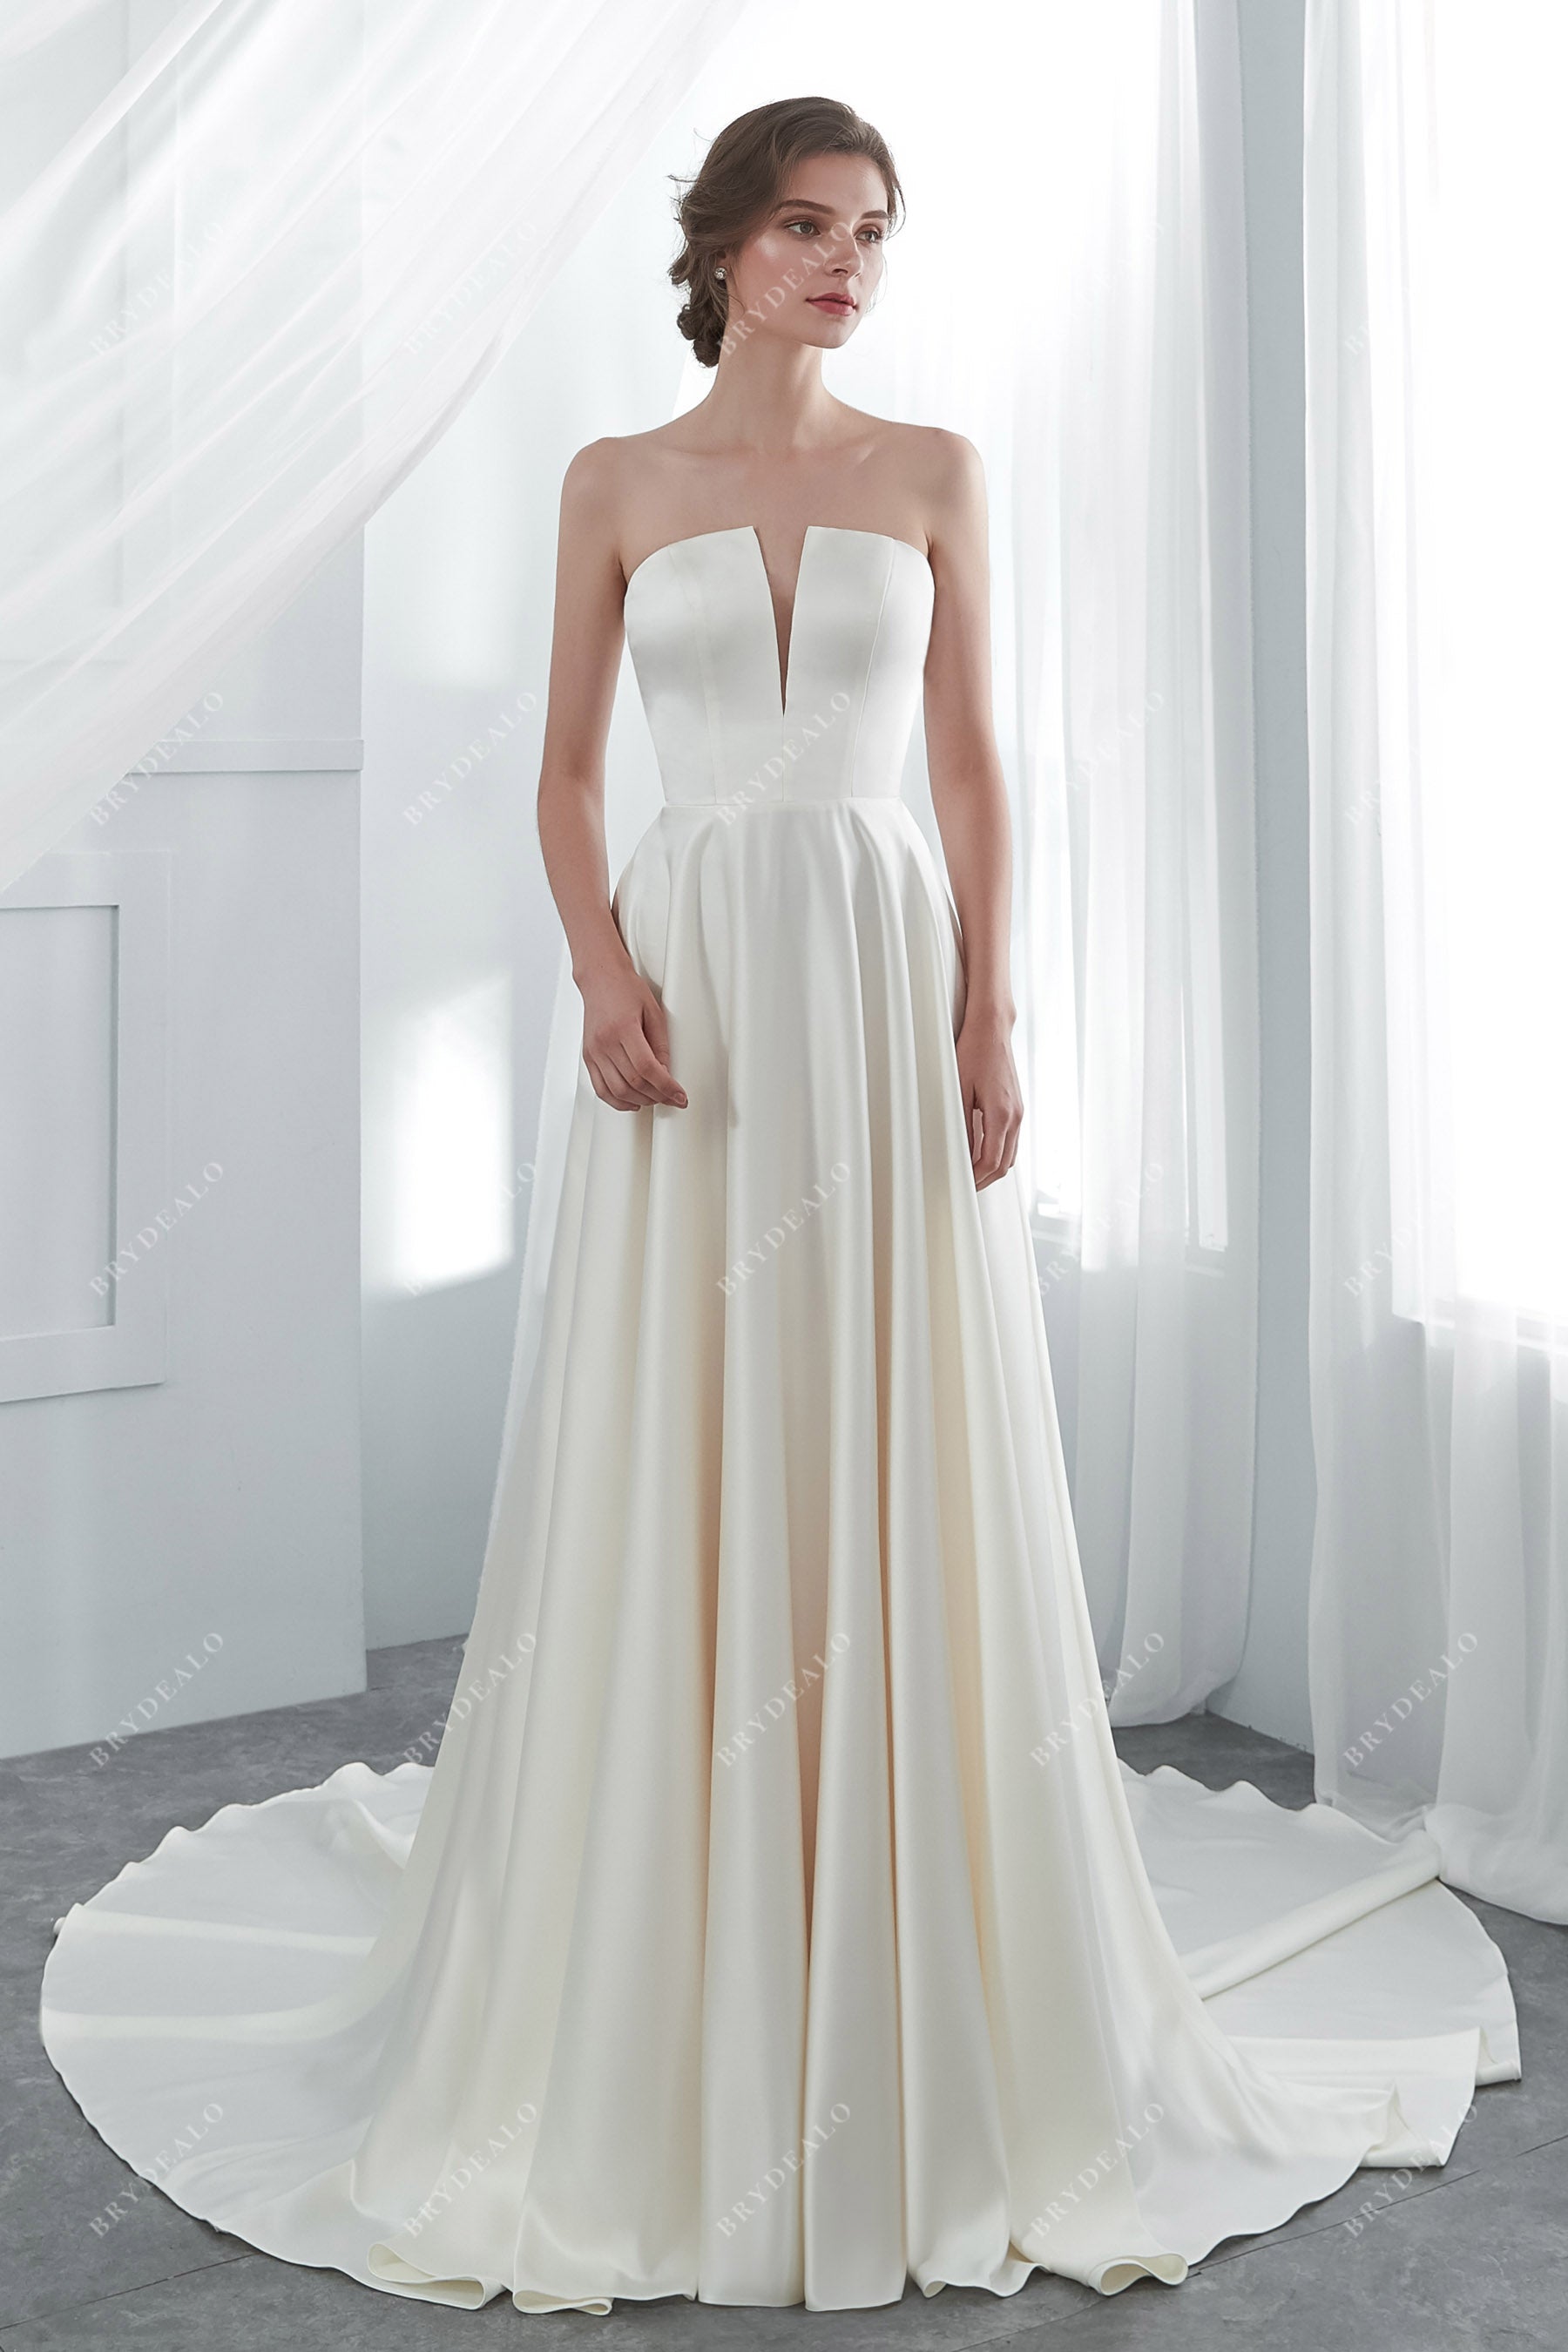 Sample Sale | Satin Classic A-line Strapless Bridal Gown